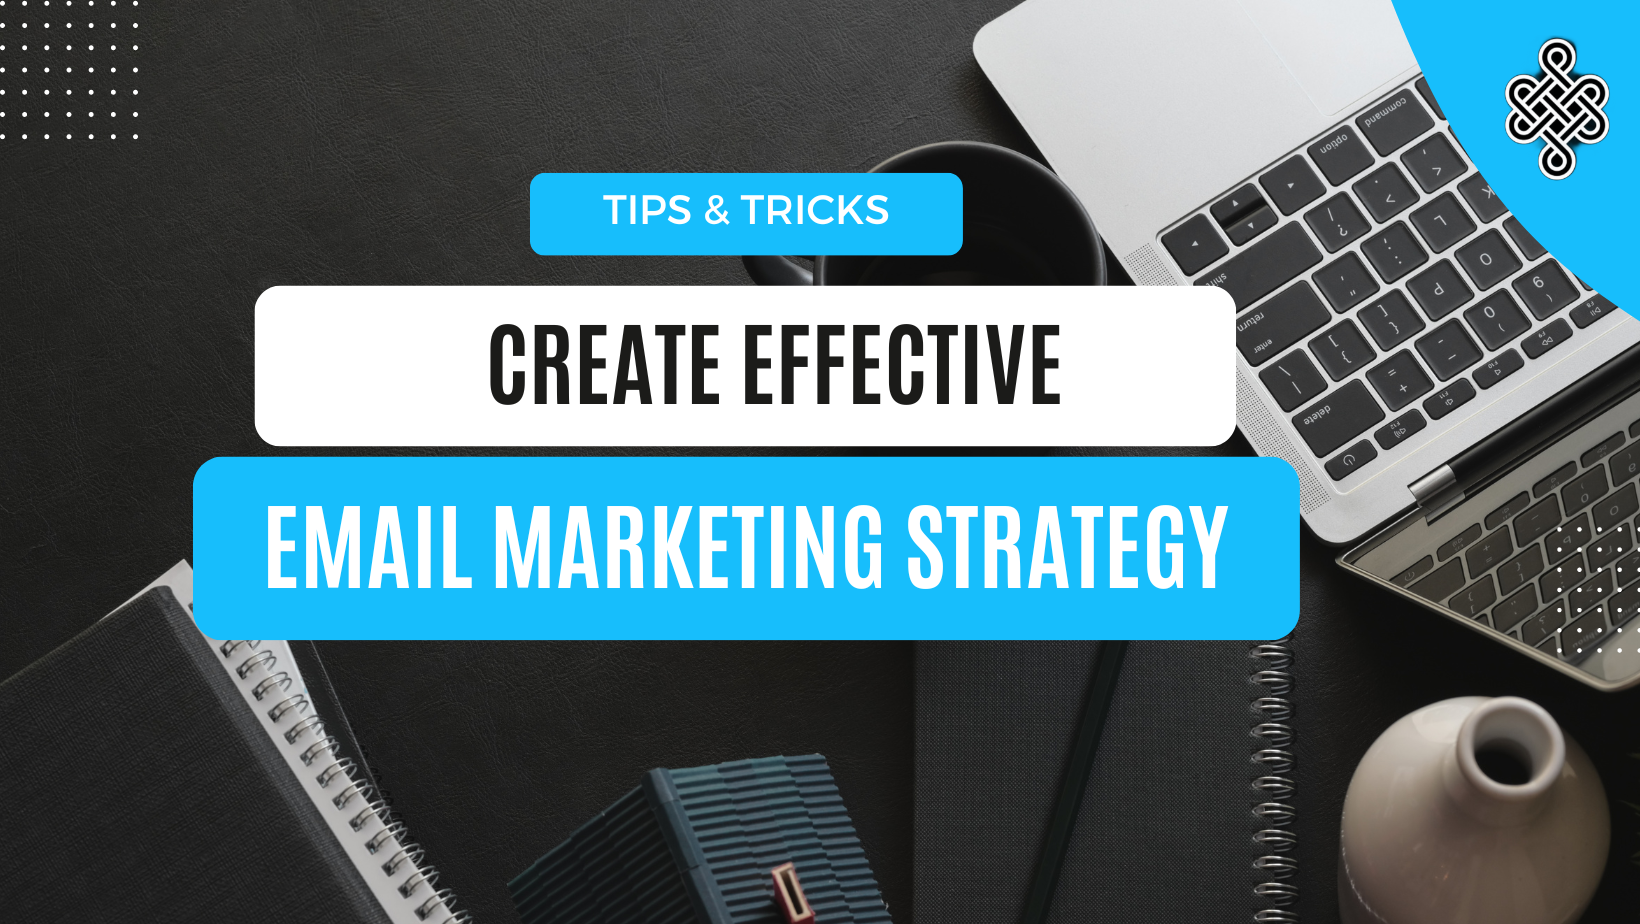 7 Steps for Effective Email Marketing to Engage Your Audience